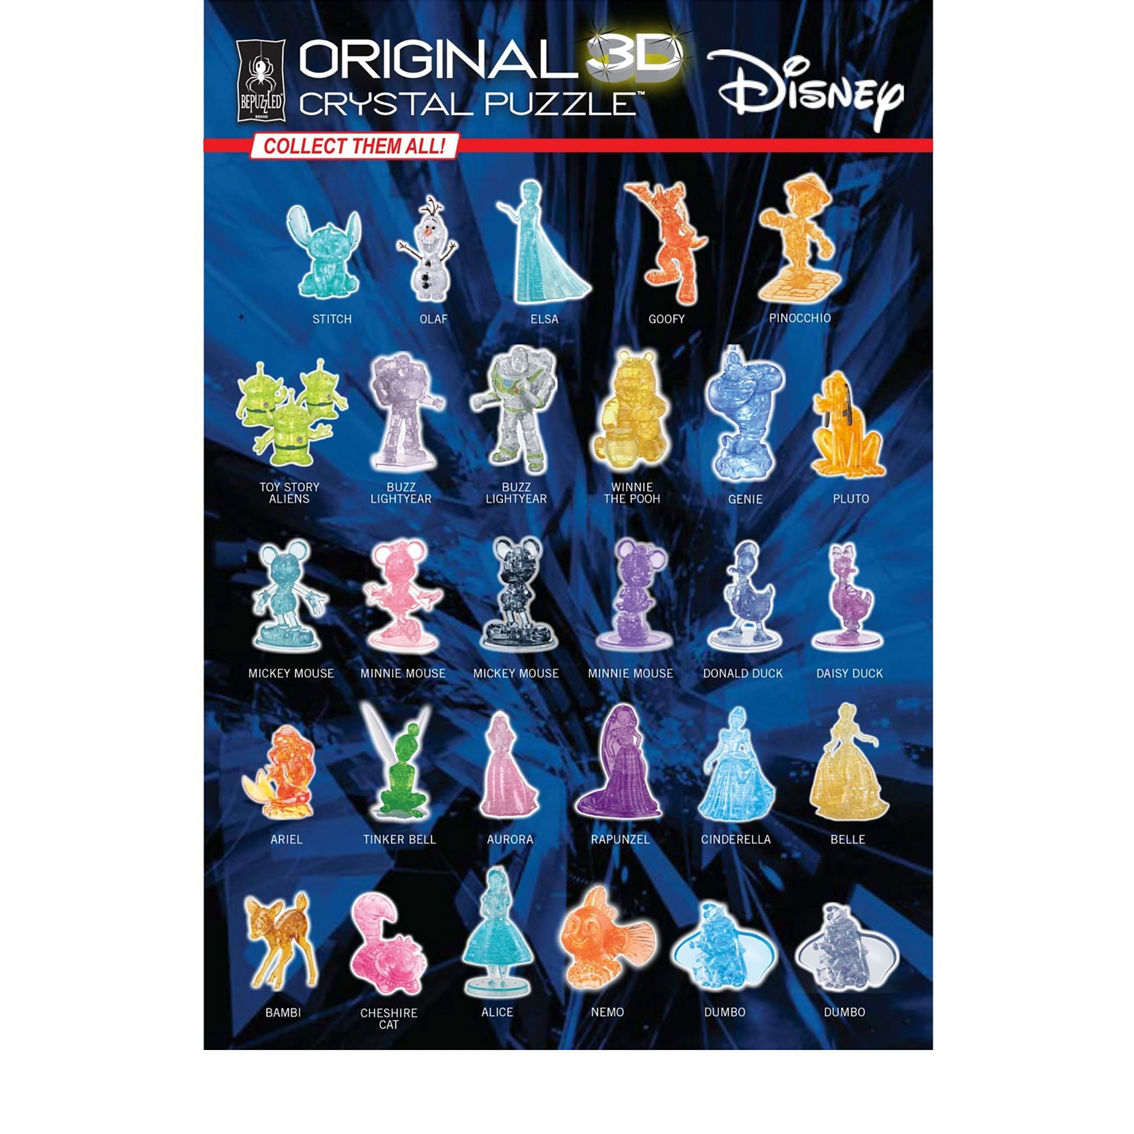 BePuzzled 3D Crystal Puzzle - Disney Peter Pan (Green): 34 Pcs - Image 3 of 5